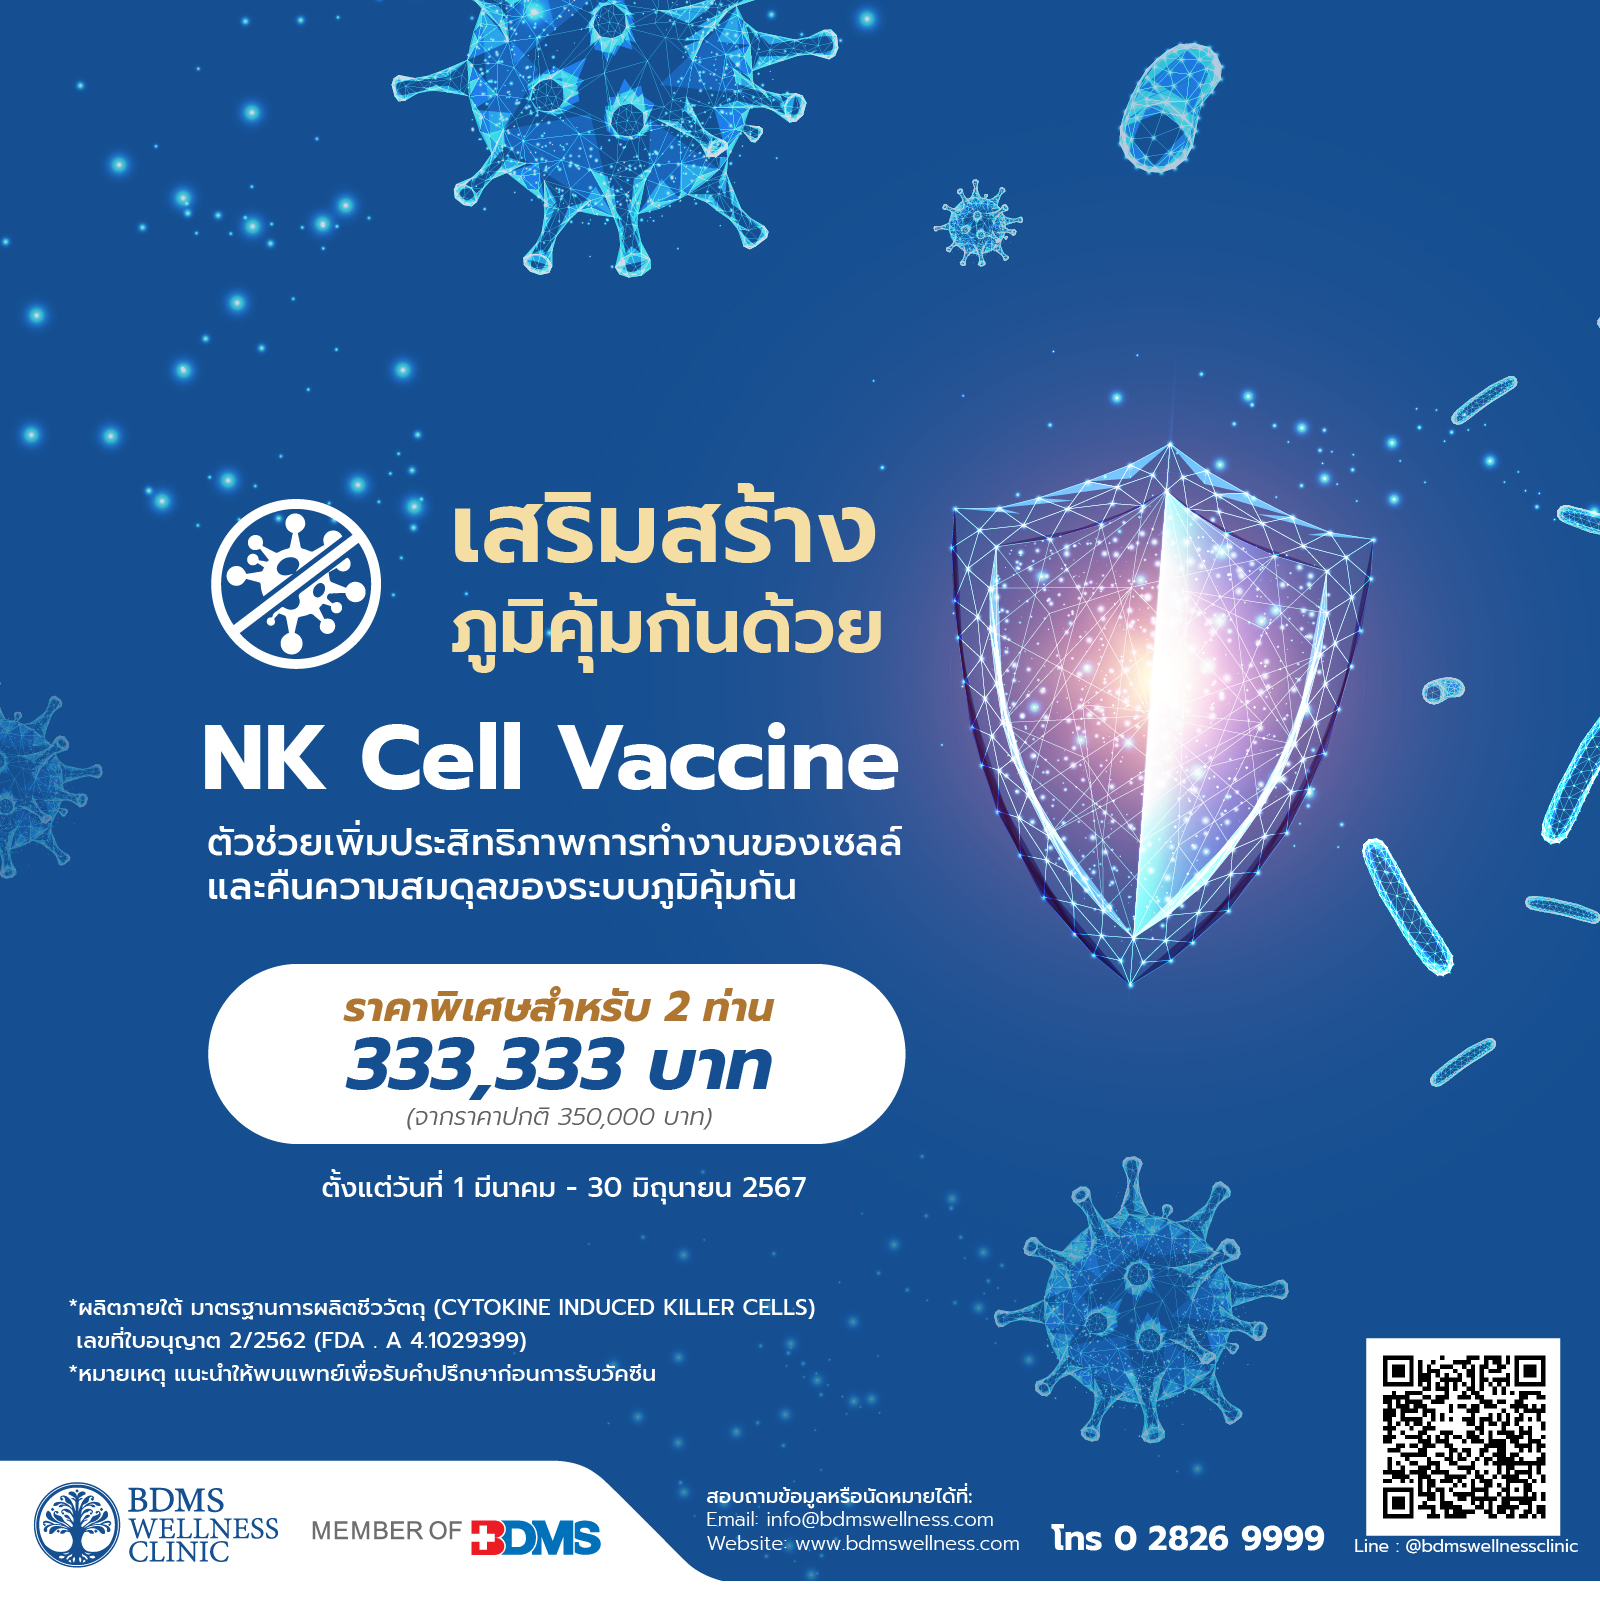 NK Cell Vaccine